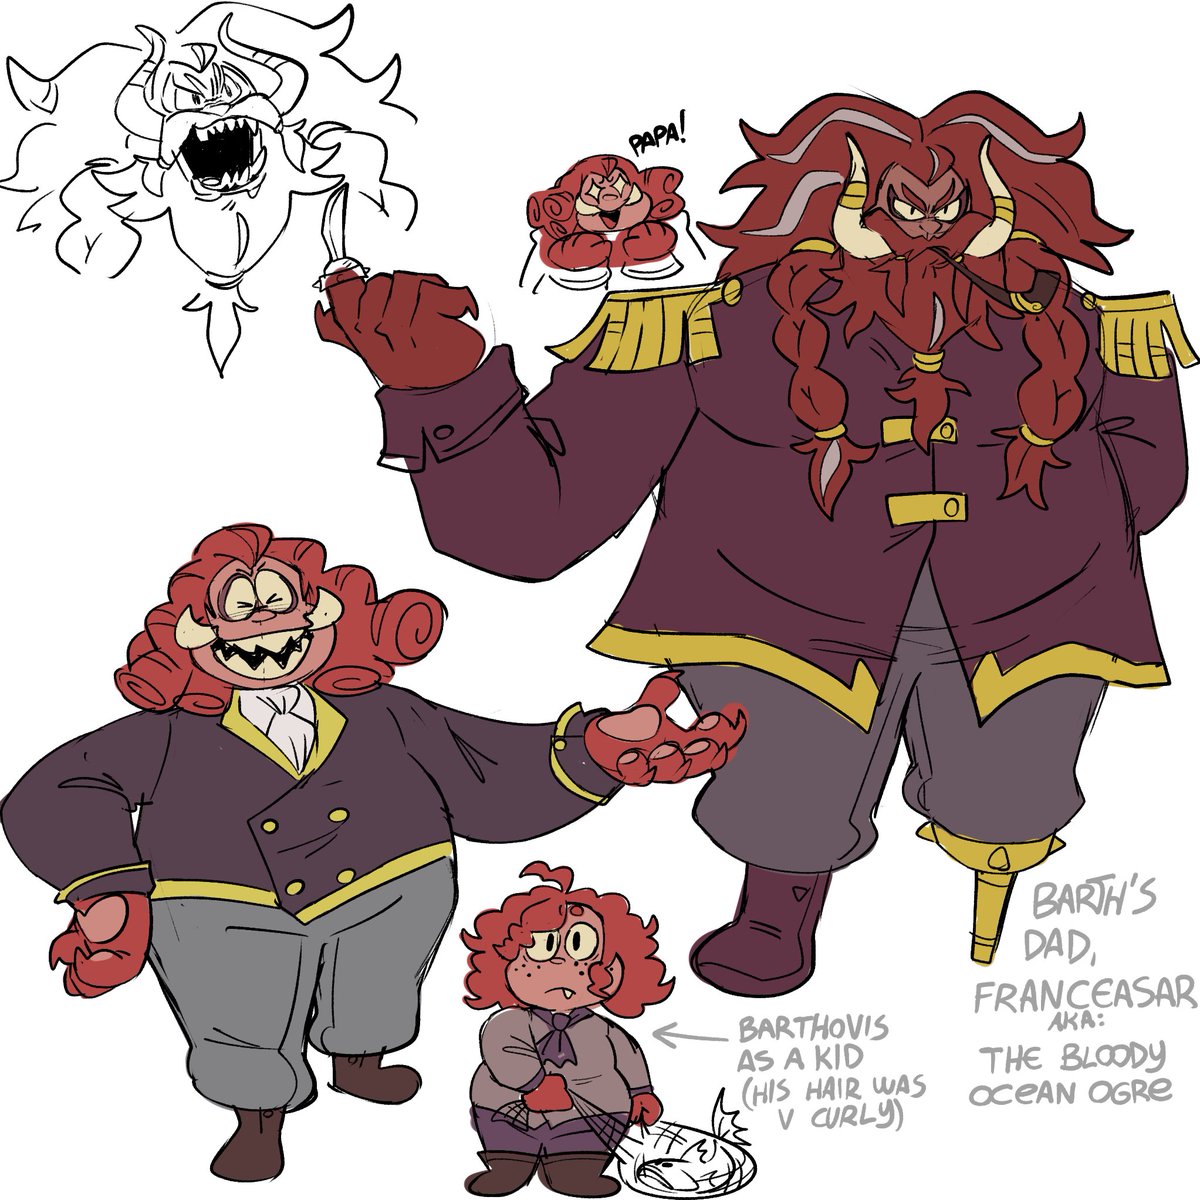 「doodles of barthovis' parents! his dad i」|VitreousGlassyのイラスト